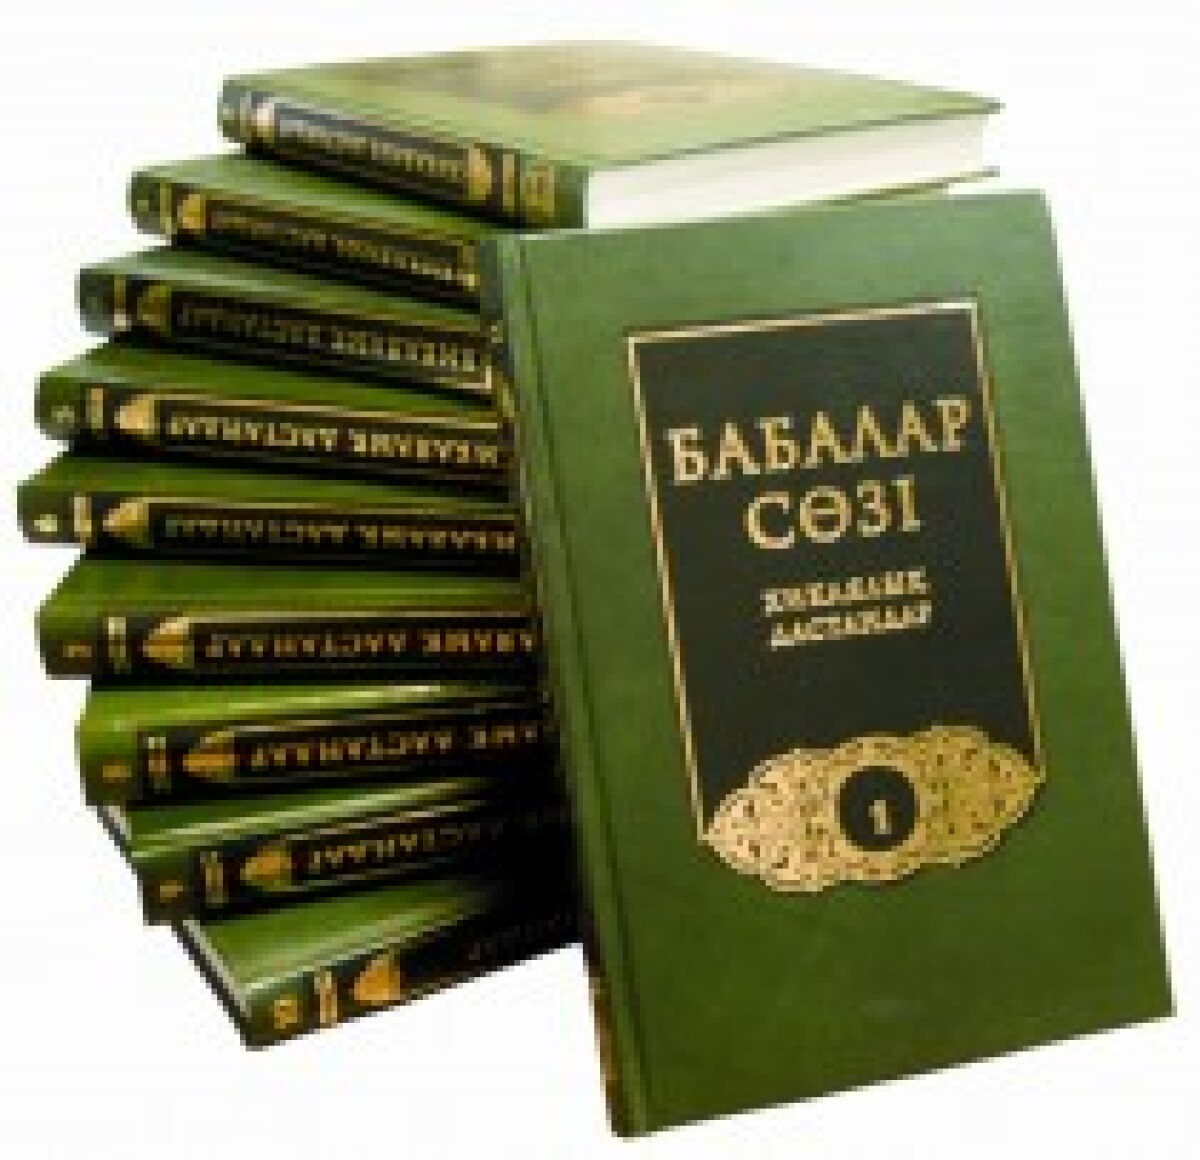 State program of the Republic of Kazakhstan "Cultural heritage" the «БАБАЛАР СӨЗІ» Series in 100 volumes - e-history.kz